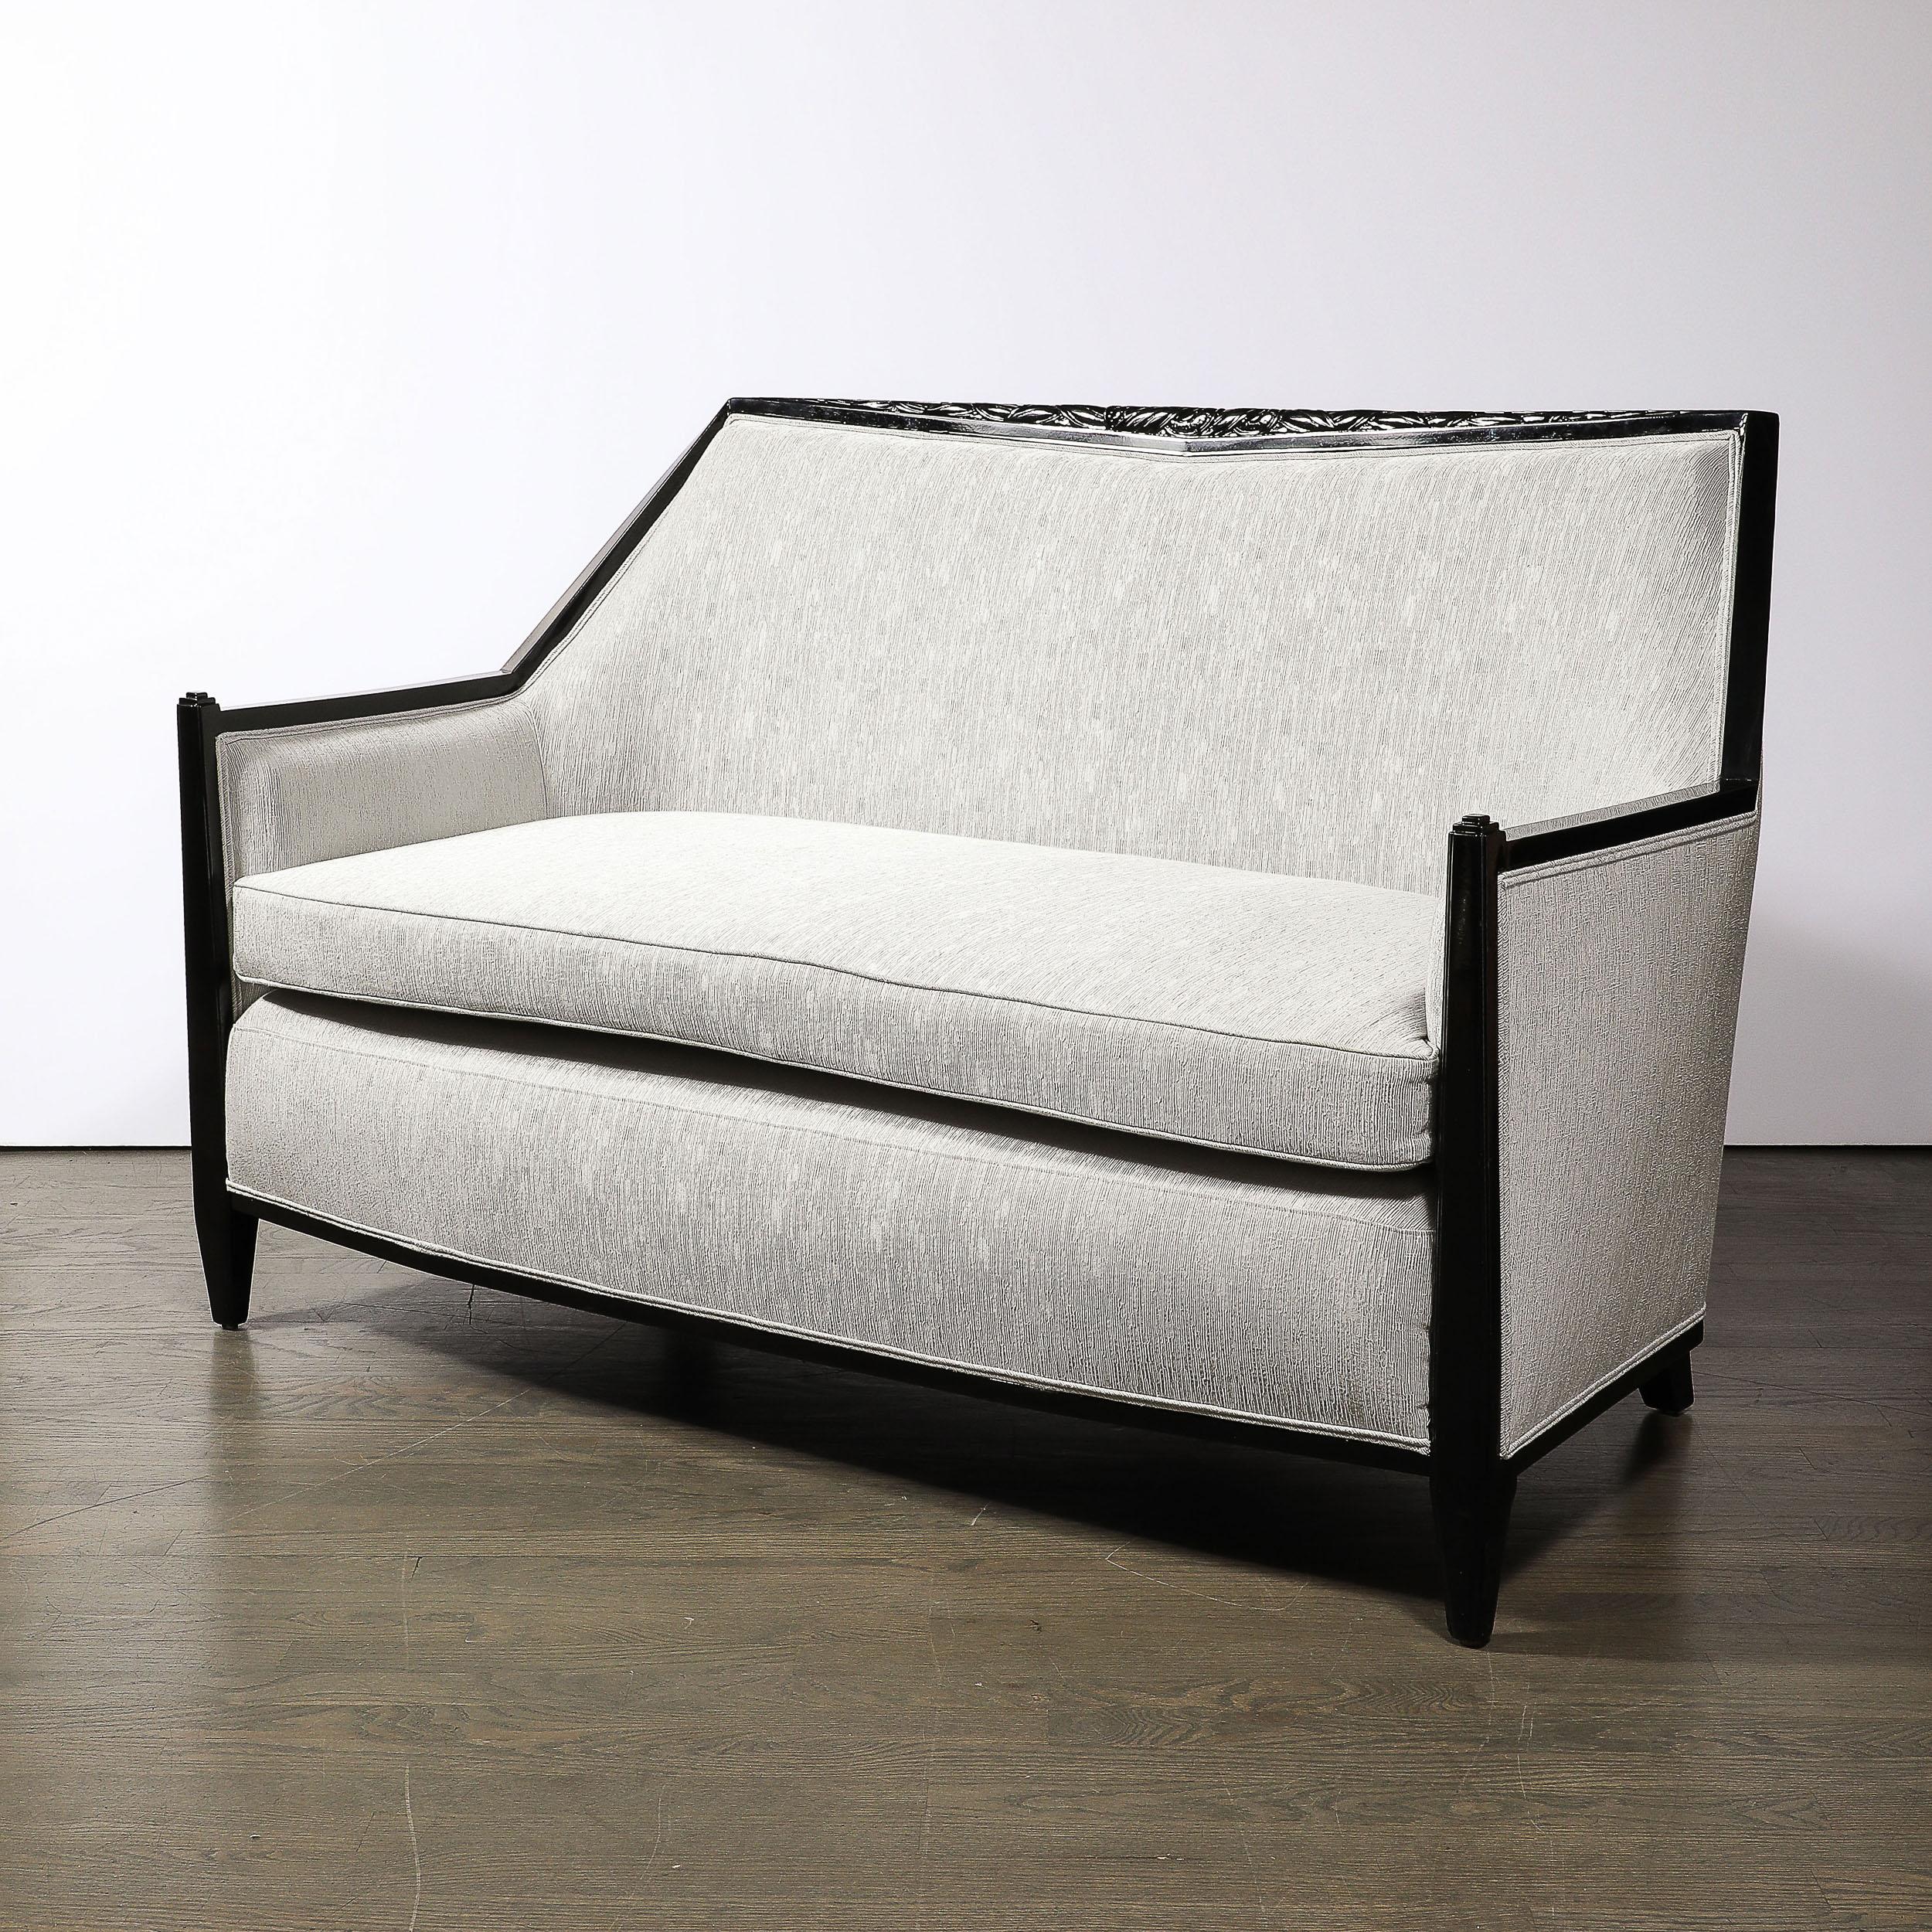 This exquisitely designed and fabricated Art Deco Cubist Skyscraper Style Settee in Black Lacquer W/Holly Hunt Upholstery in the Manner of Ruhlmann originates from France, Circa 1930. The piece features a beautifully proportioned geometric